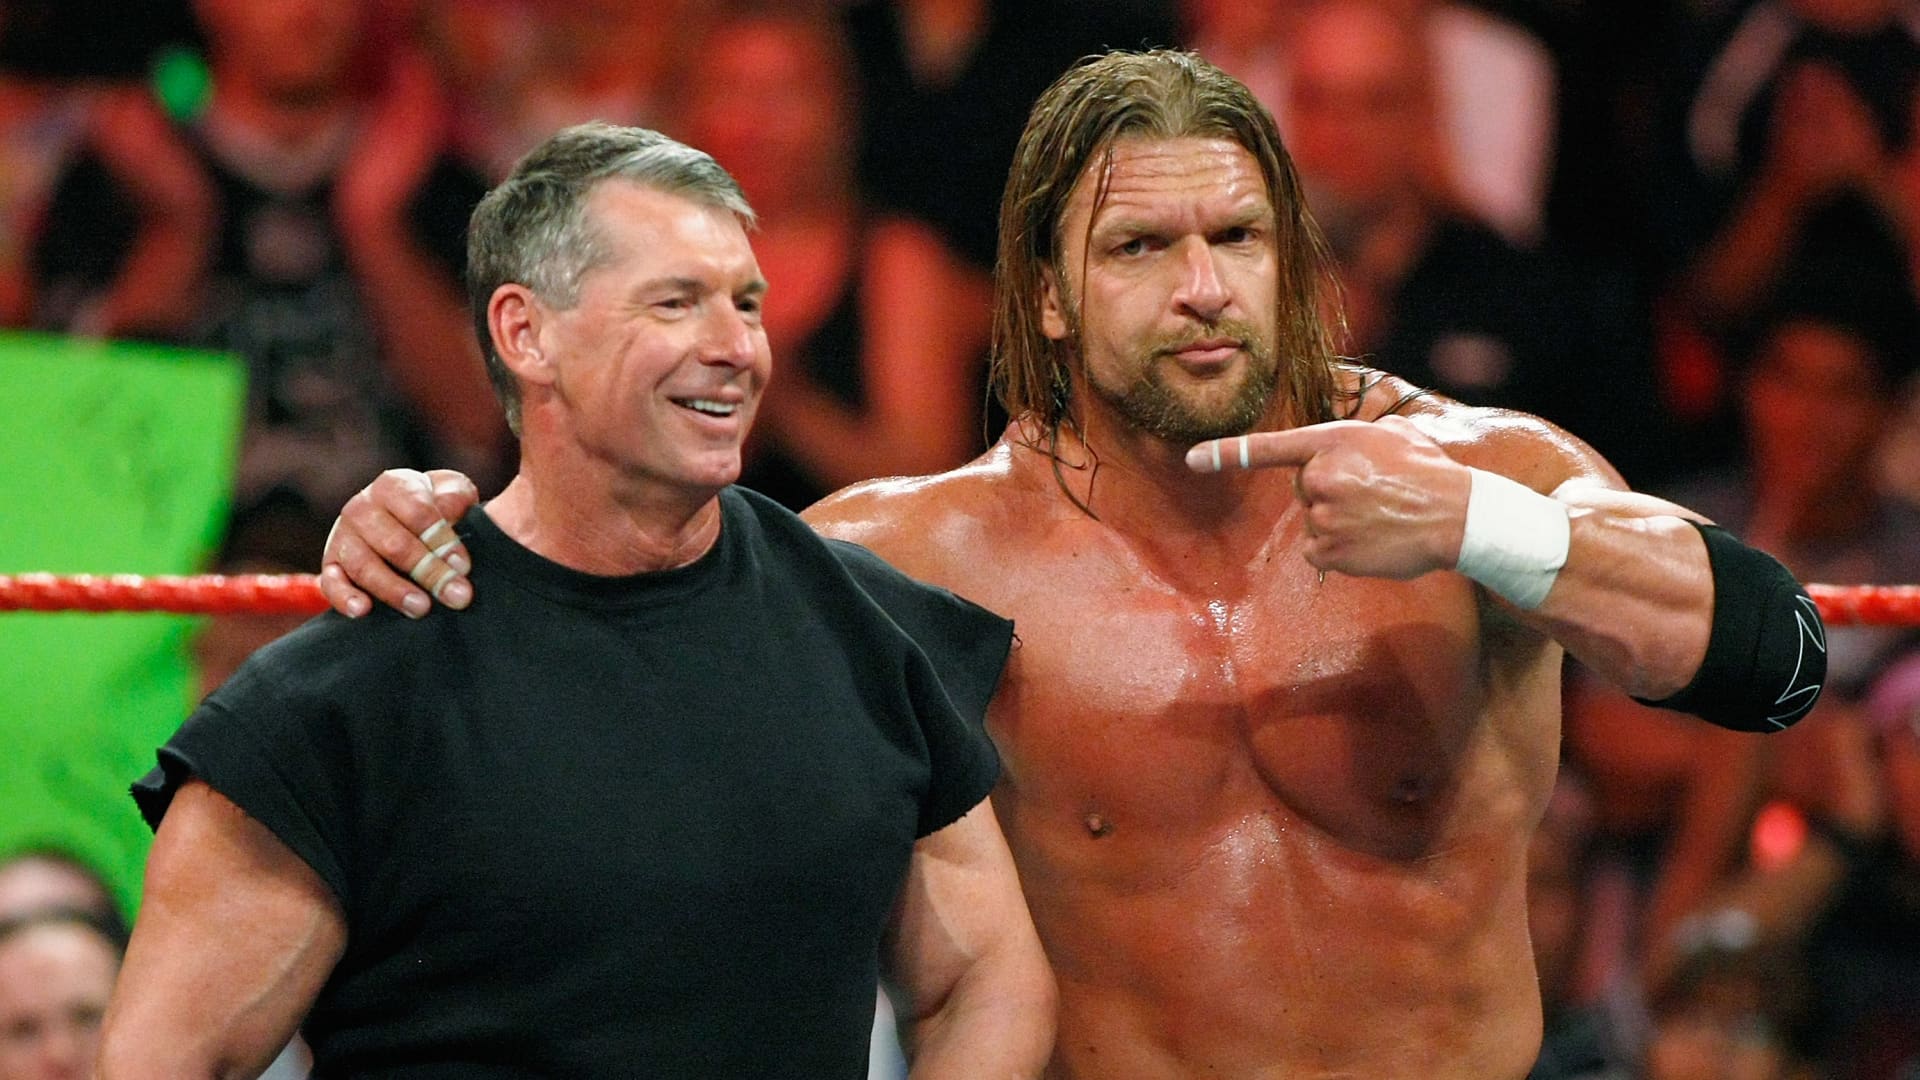 WWE discloses another $5 million in McMahon payments, delays earnings report - CNBC